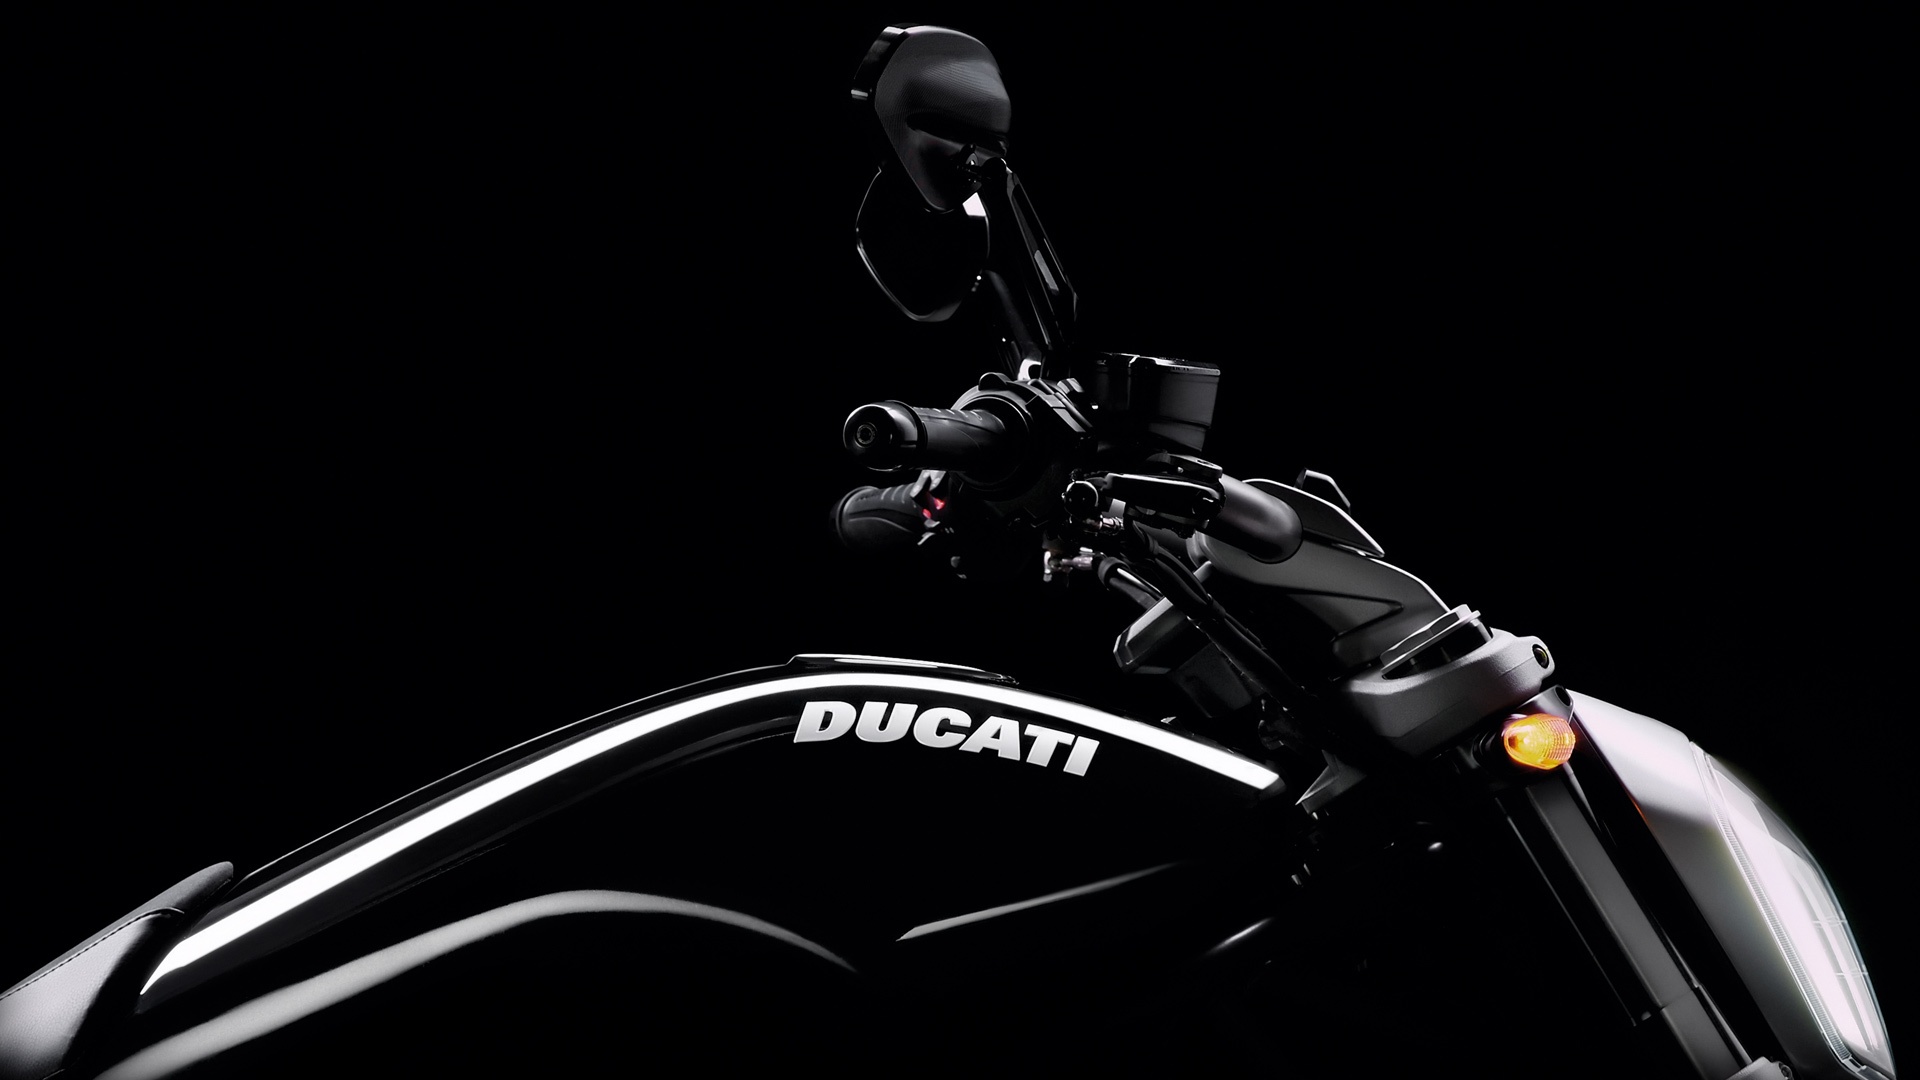 NEWS: Ducati XDiavel Launched in India